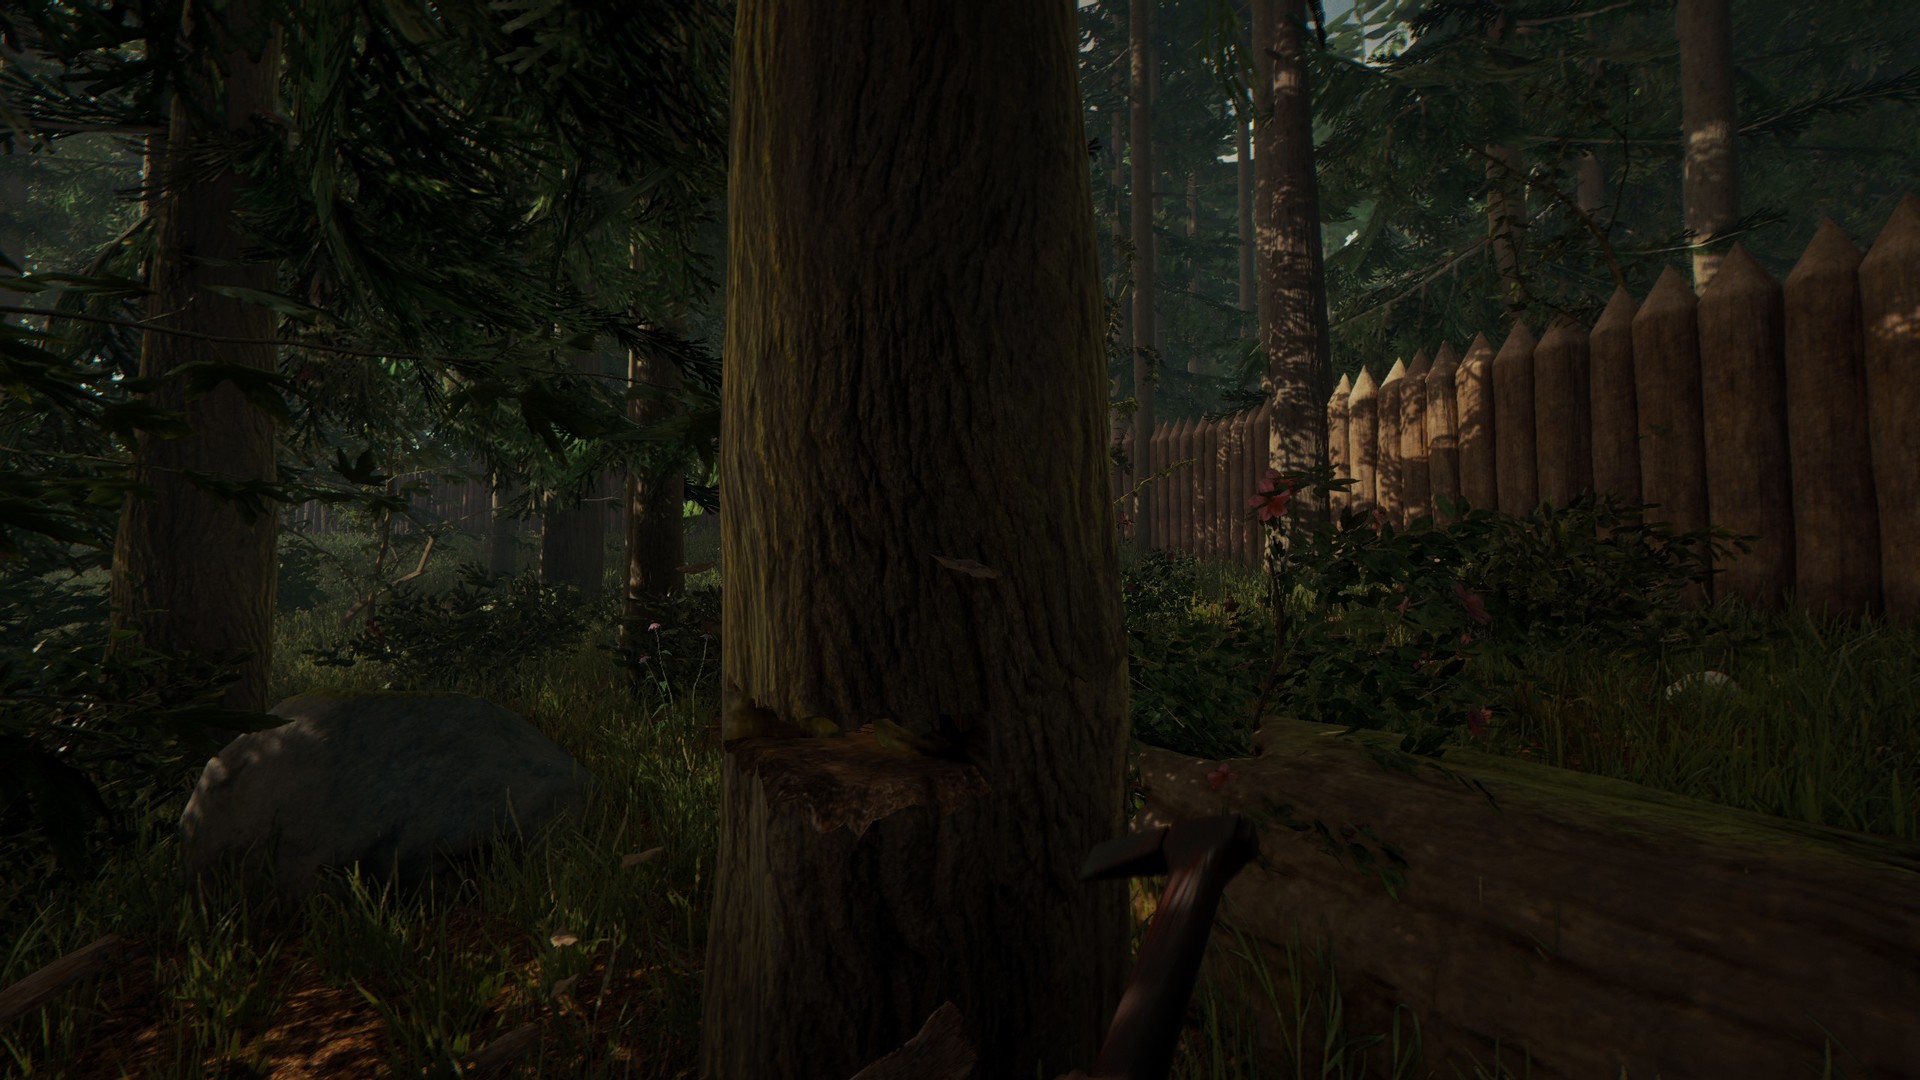 The Forest System Requirements - Can I Run It? - PCGameBenchmark